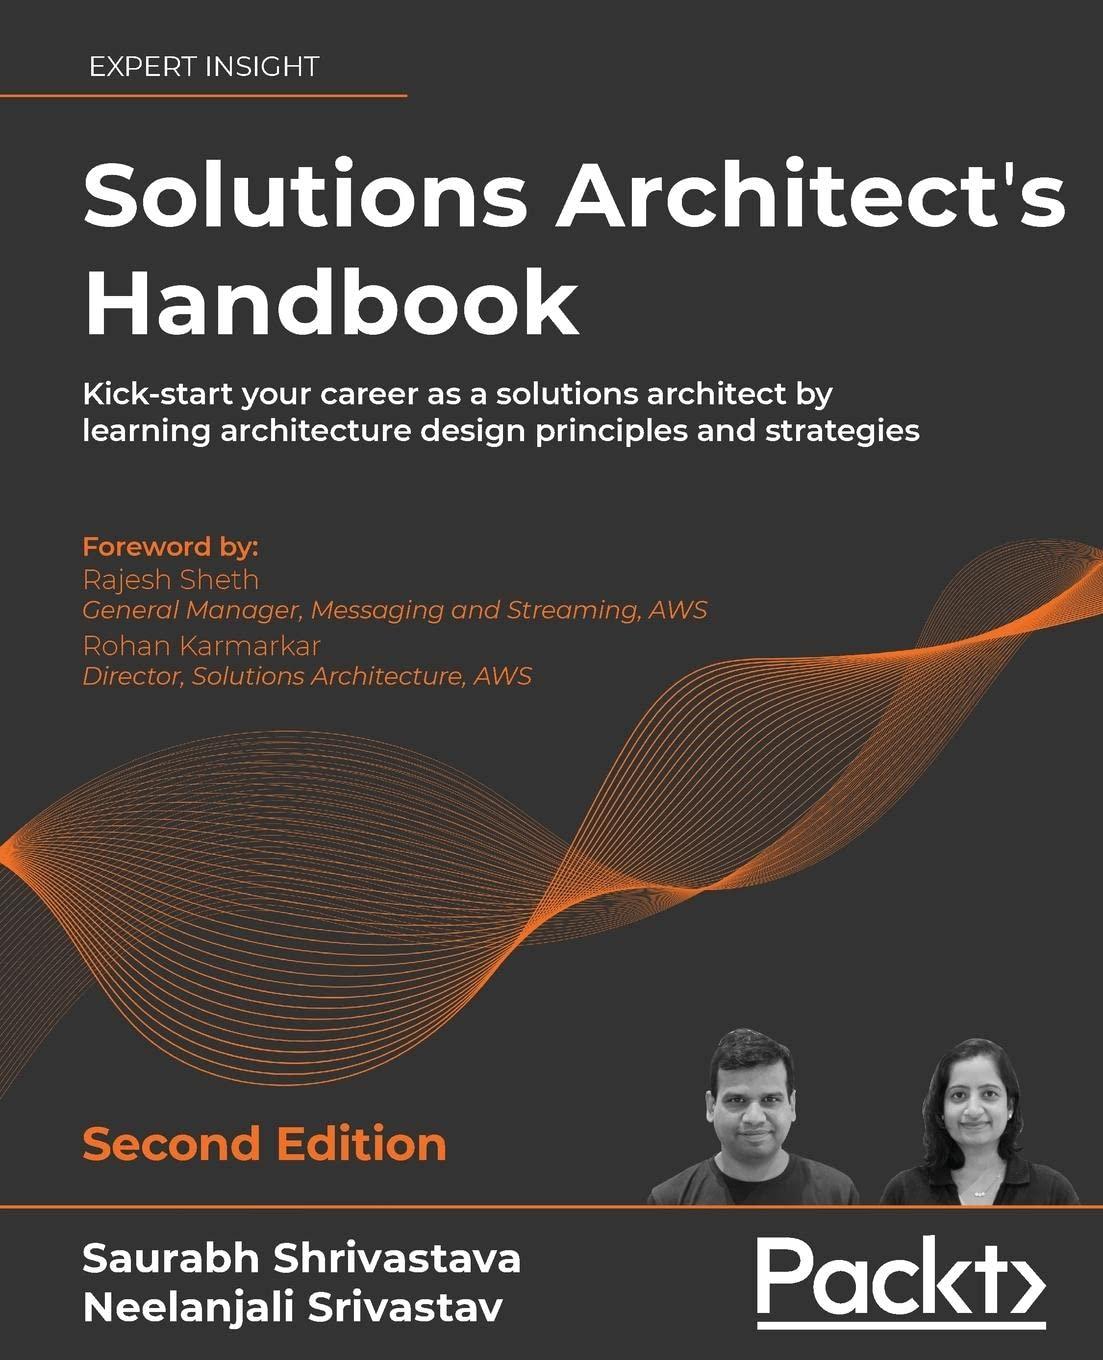 solutions architect's handbook kick start your career as a solutions architect by learning architecture